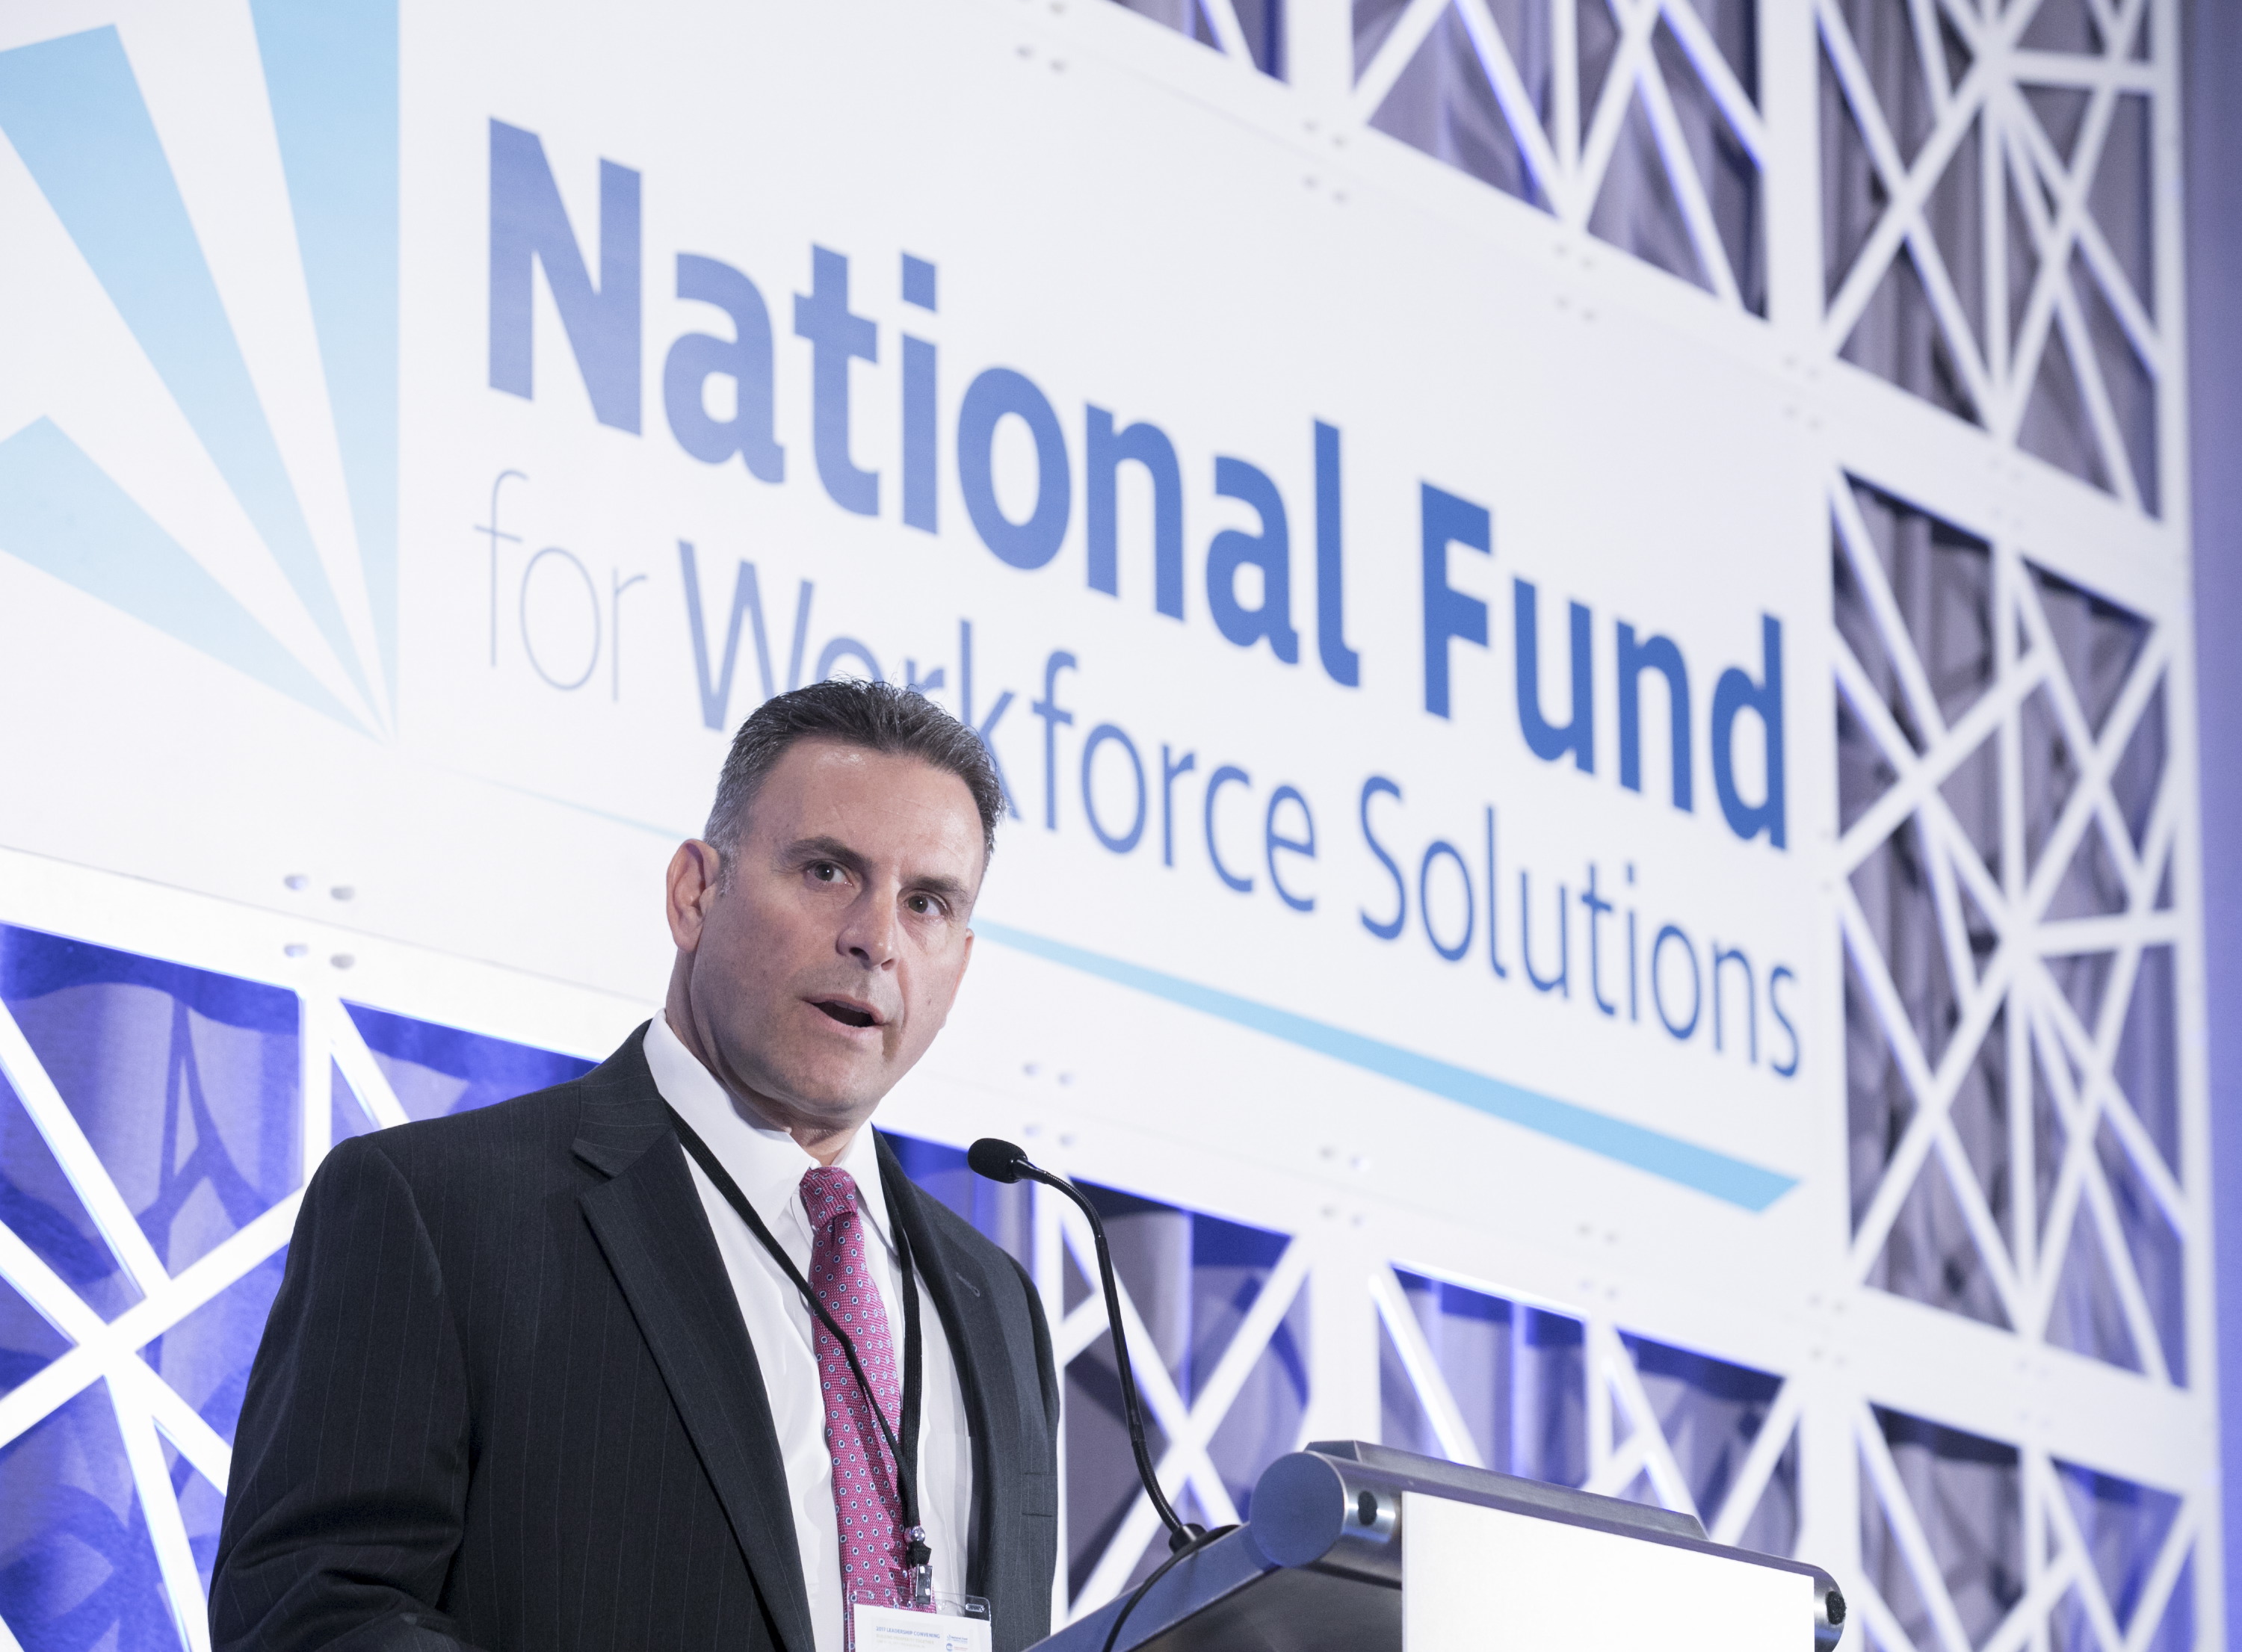 BLU elevates policy and shares best practices at National Fund for Workforce Solutions Leadership Convening 